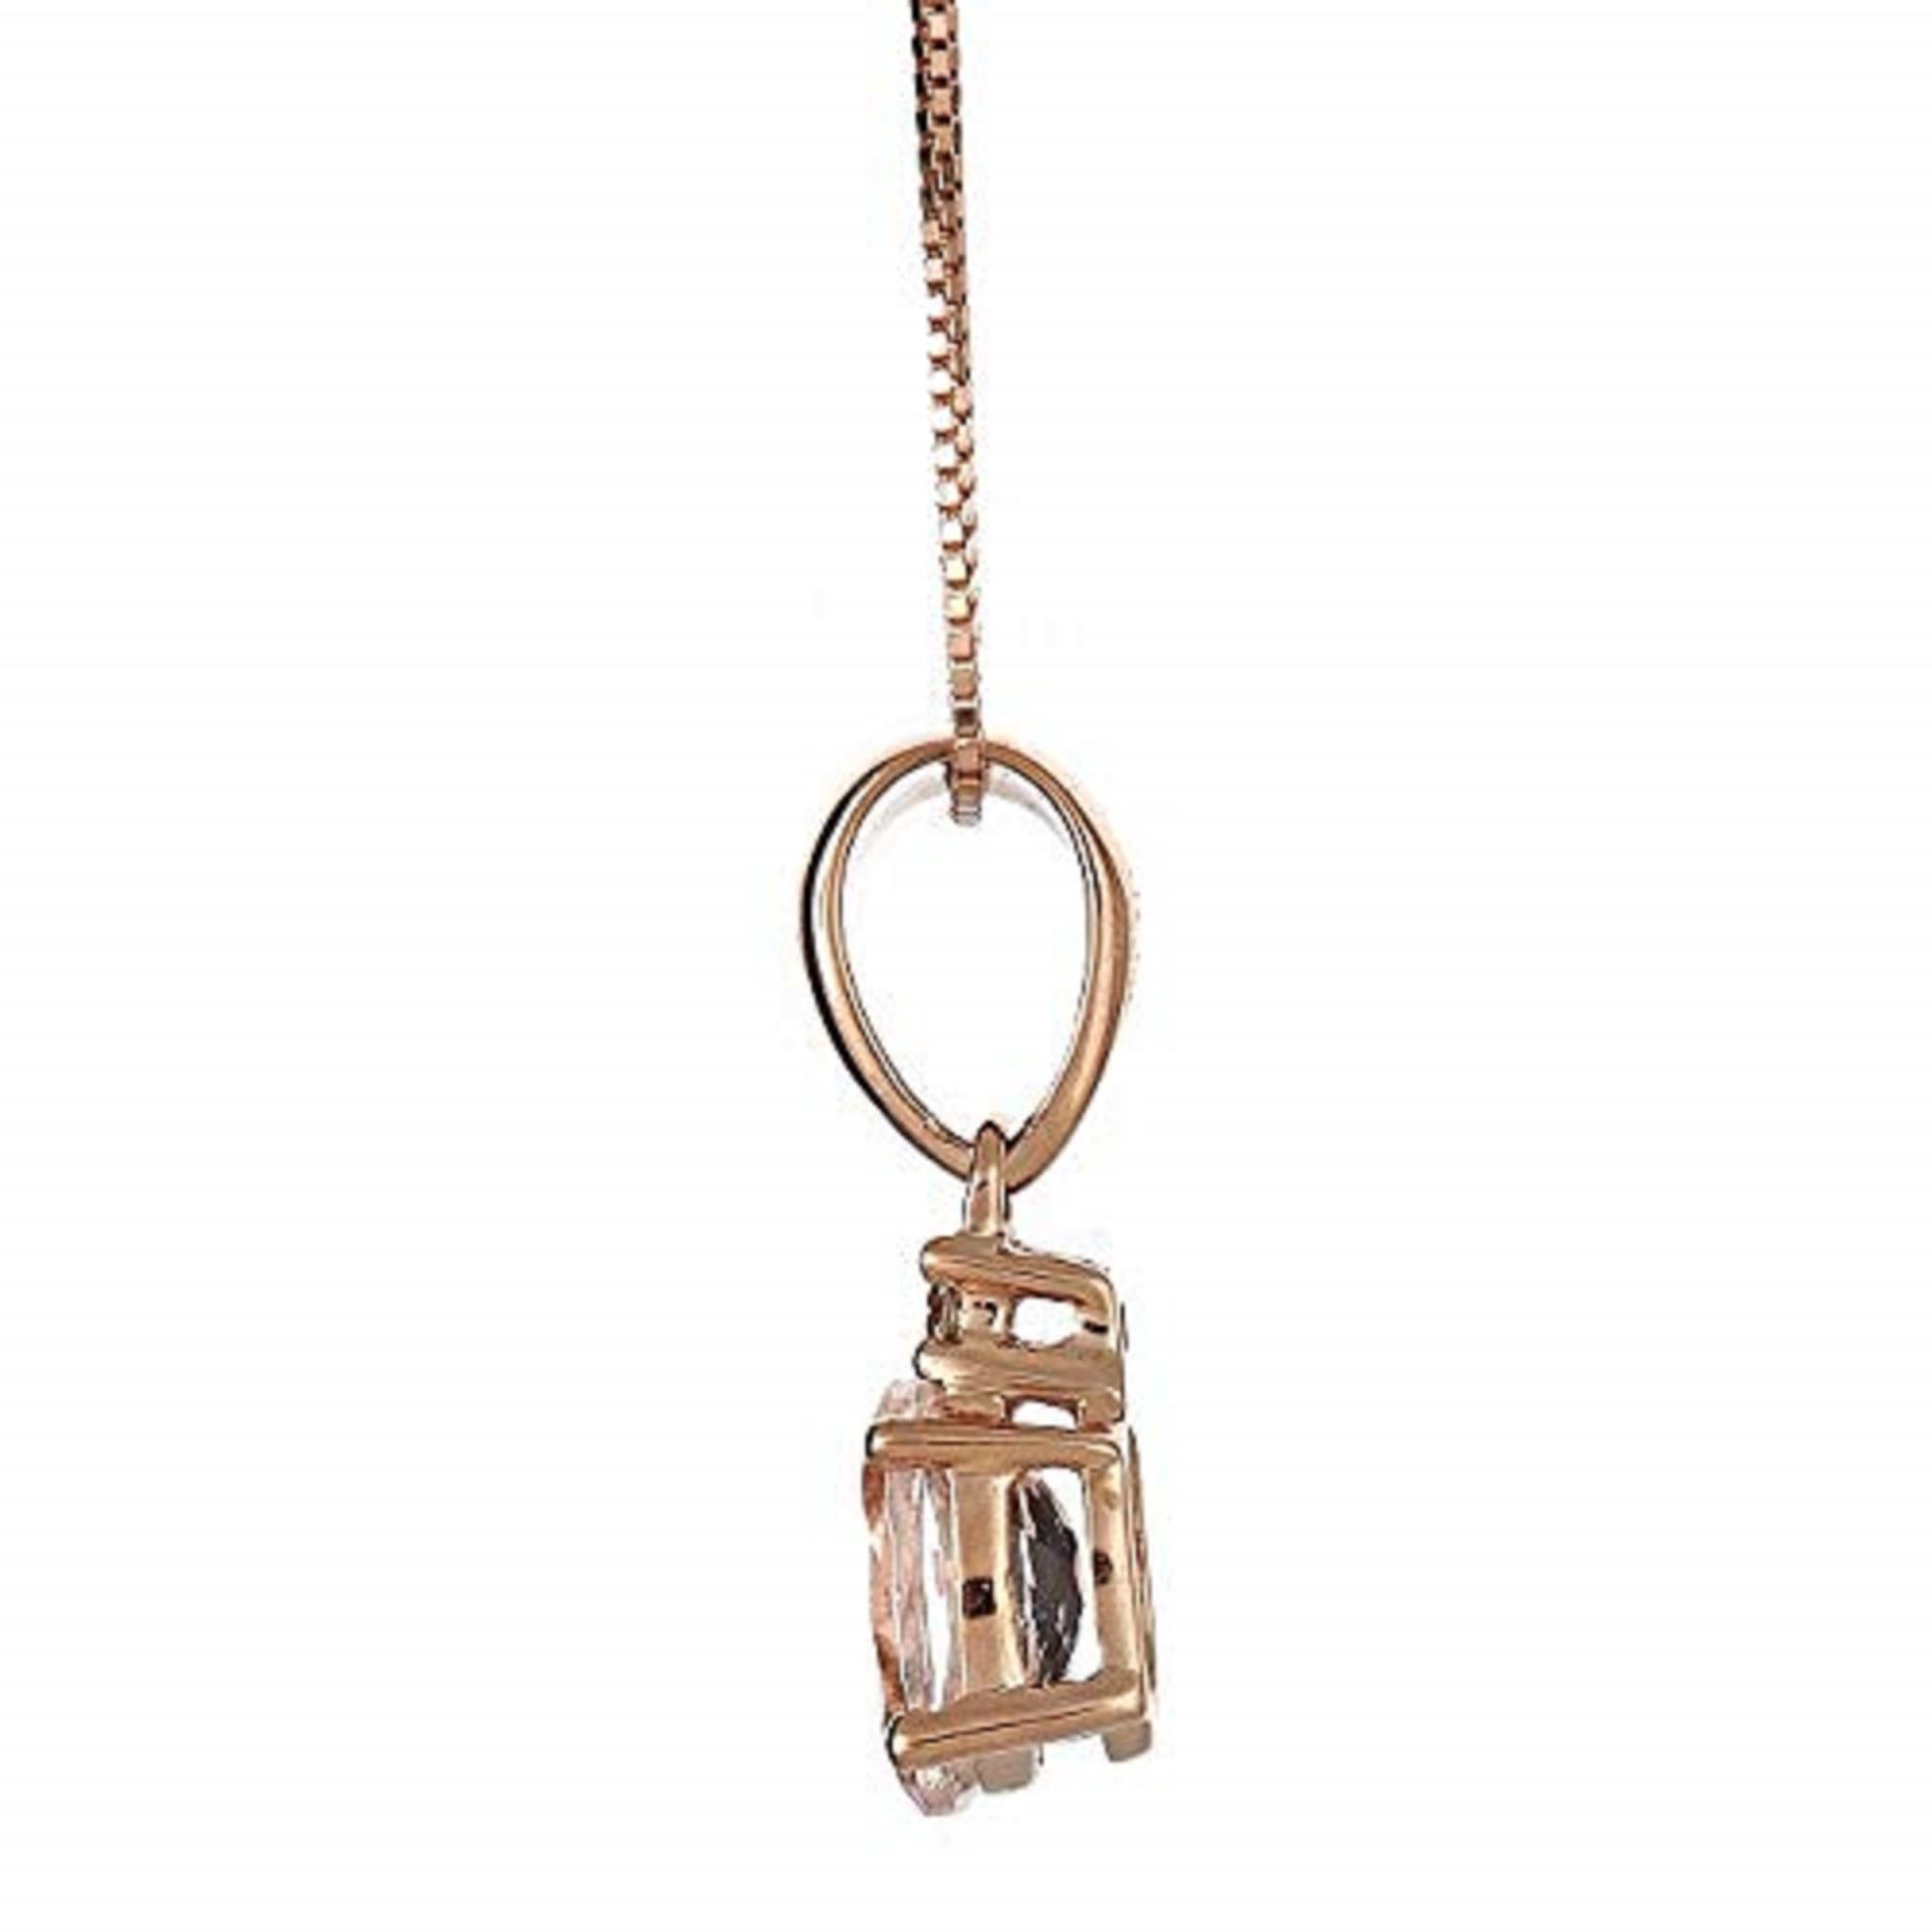 This gorgeous pendant showcases Gin & Grace morganite gemstones with beautiful, natural diamond accents. The pendant hangs on an 18-inch box chain that secures with a spring-ring clasp. Style: Pendant Gemstone colors: Pink Gemstone shapes: Oval-cut